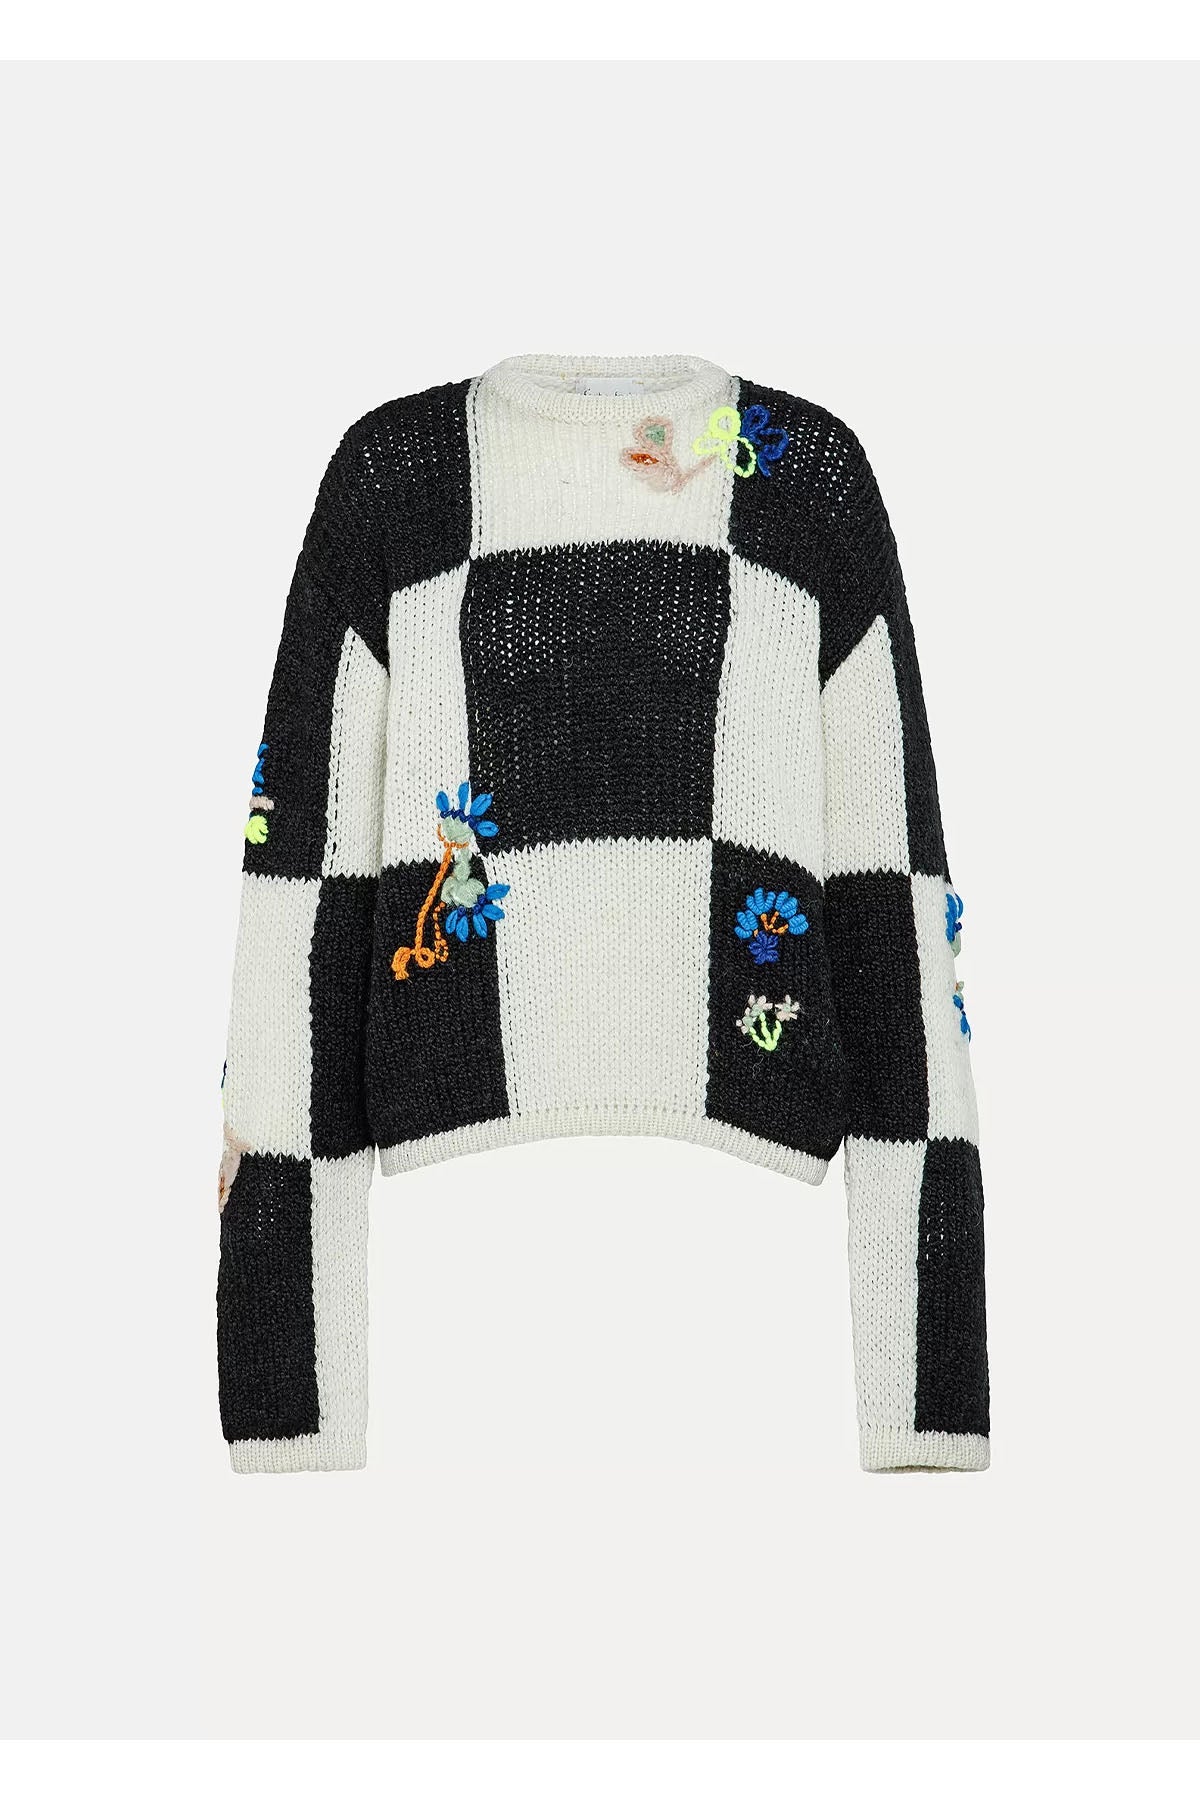 Forte Forte "Le Grand Damier" Embroidery Wool Sweater